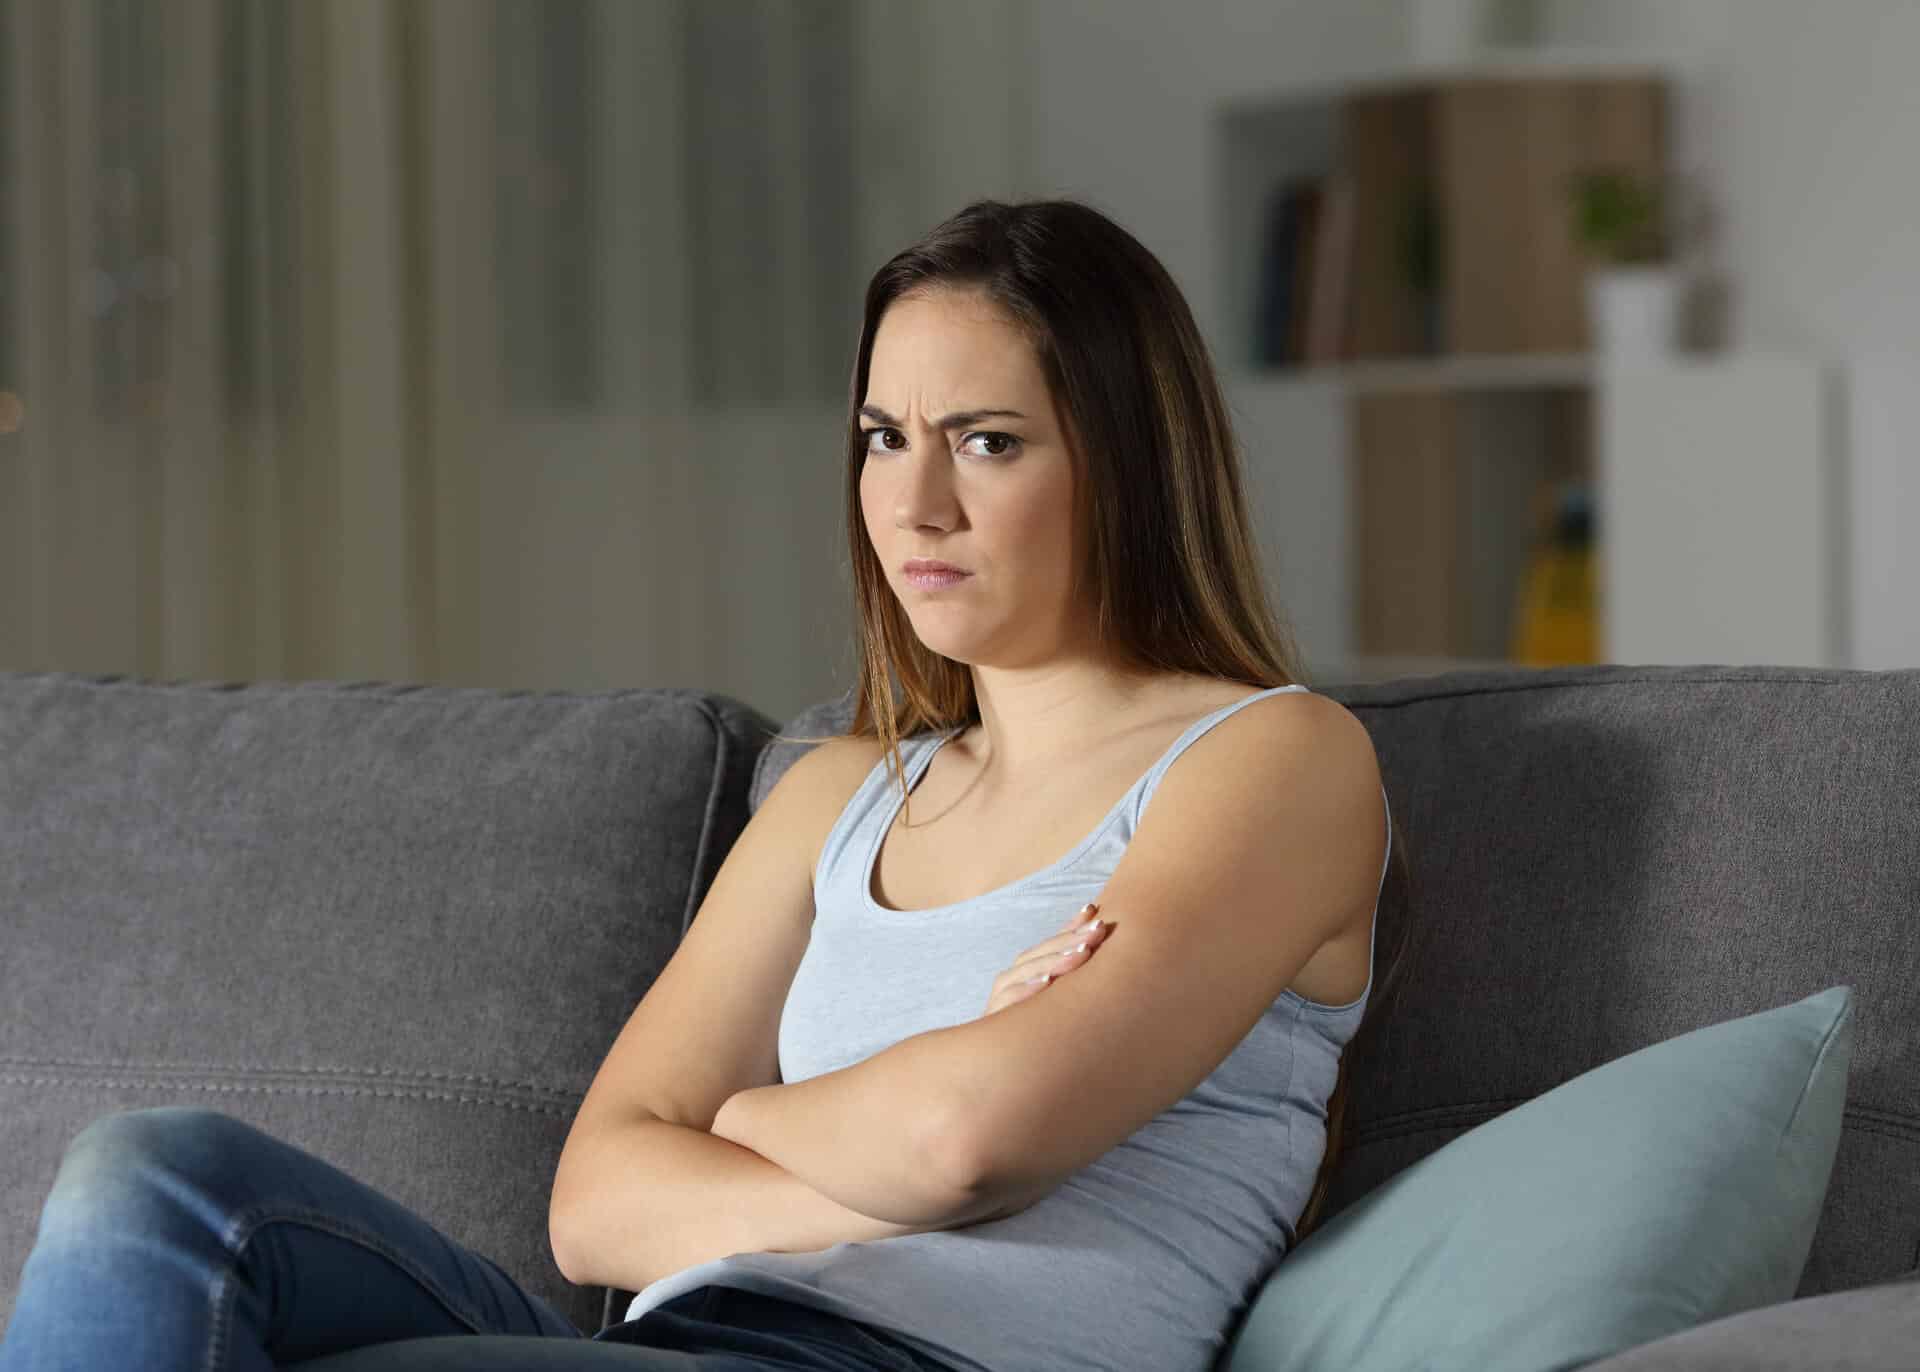 angry young woman with crossed arms